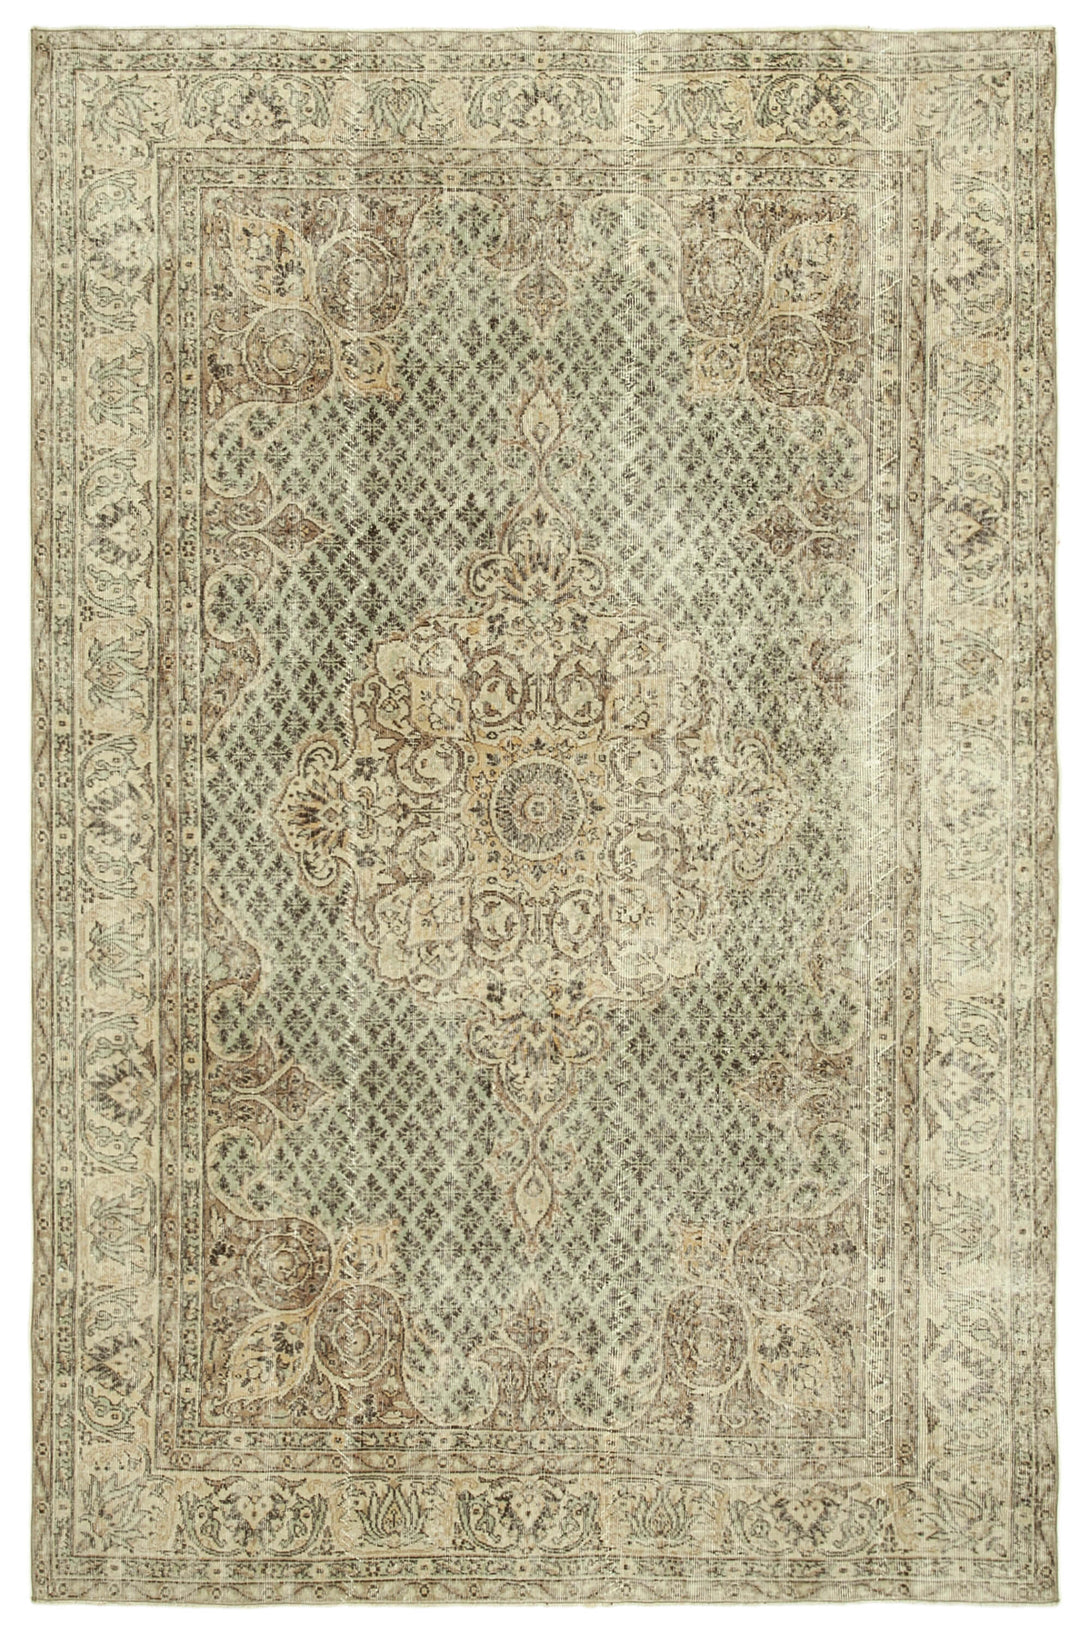 Handmade White Wash Area Rug > Design# OL-AC-39325 > Size: 6'-9" x 10'-1", Carpet Culture Rugs, Handmade Rugs, NYC Rugs, New Rugs, Shop Rugs, Rug Store, Outlet Rugs, SoHo Rugs, Rugs in USA